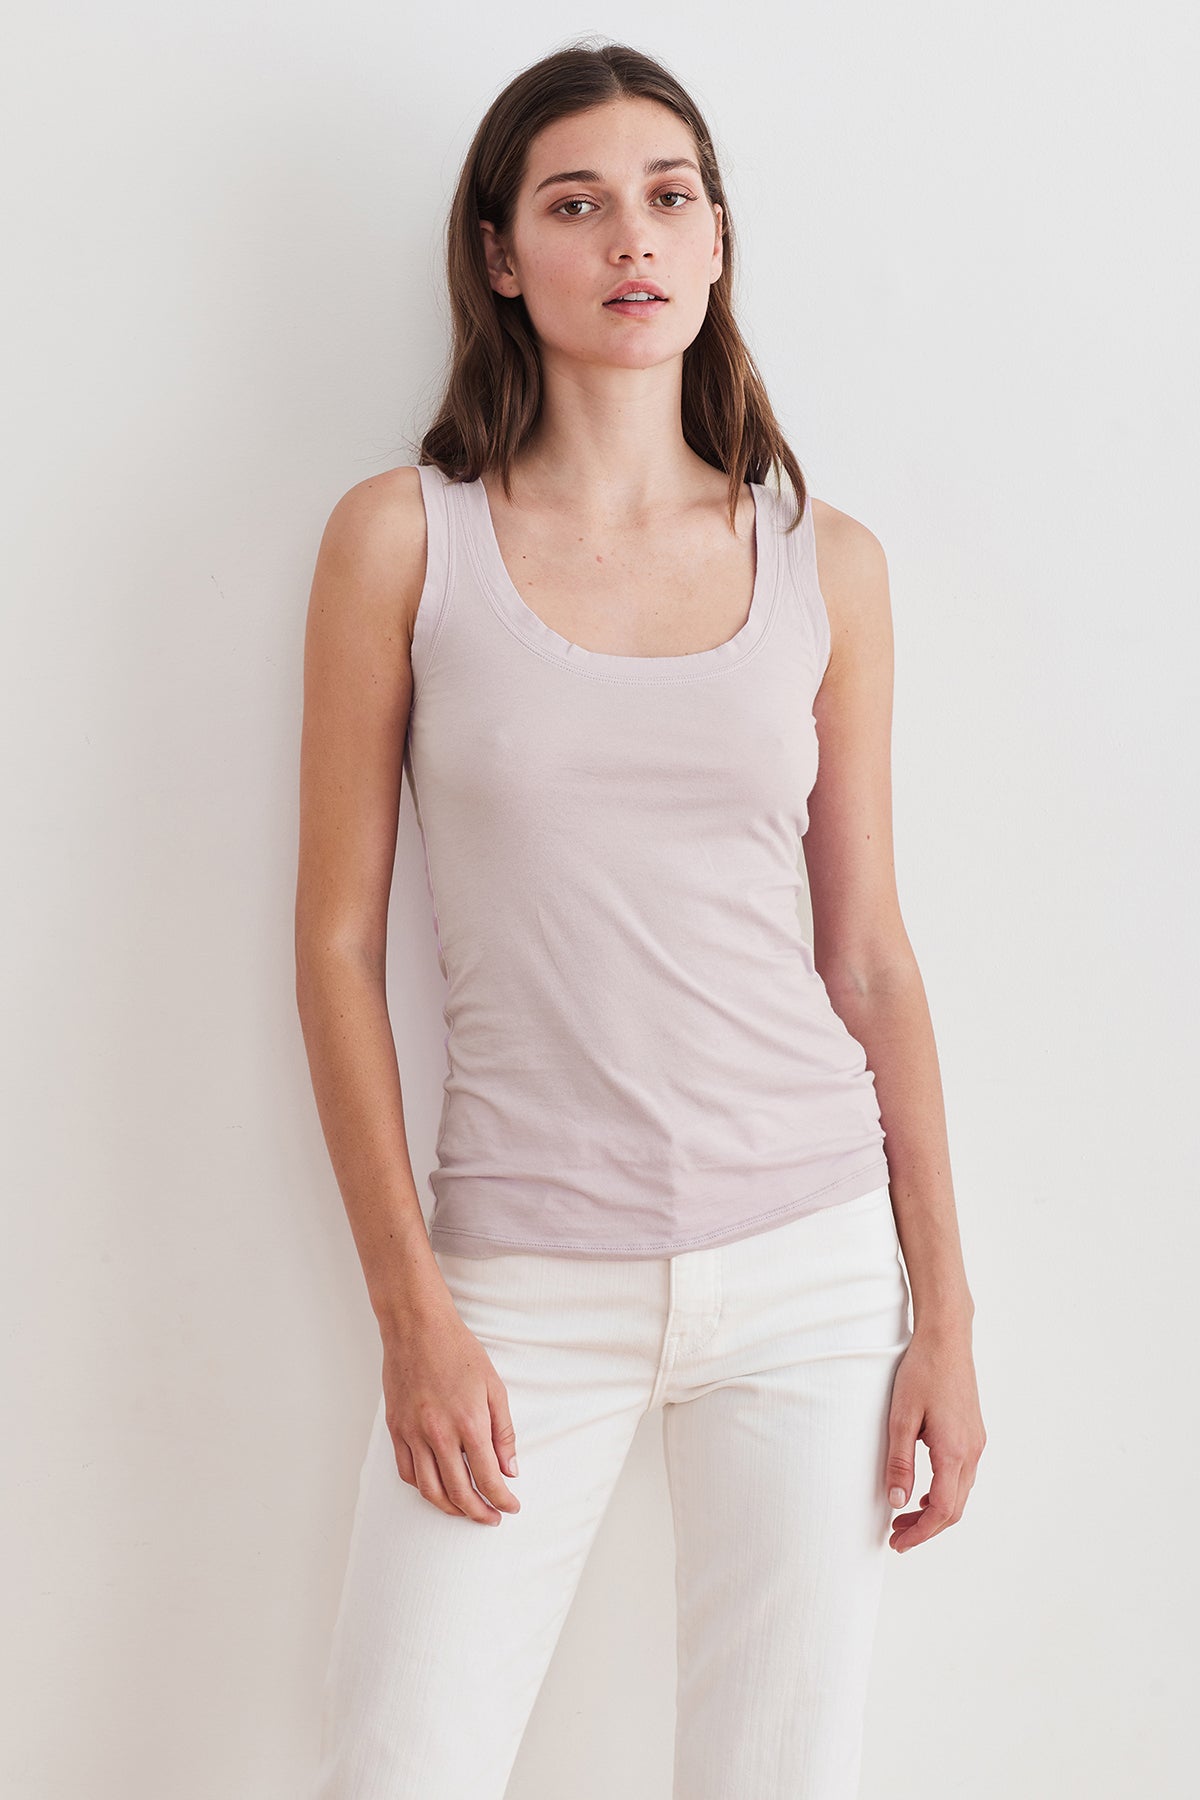   MOSSY GAUZY WHISPER FITTED TANK 